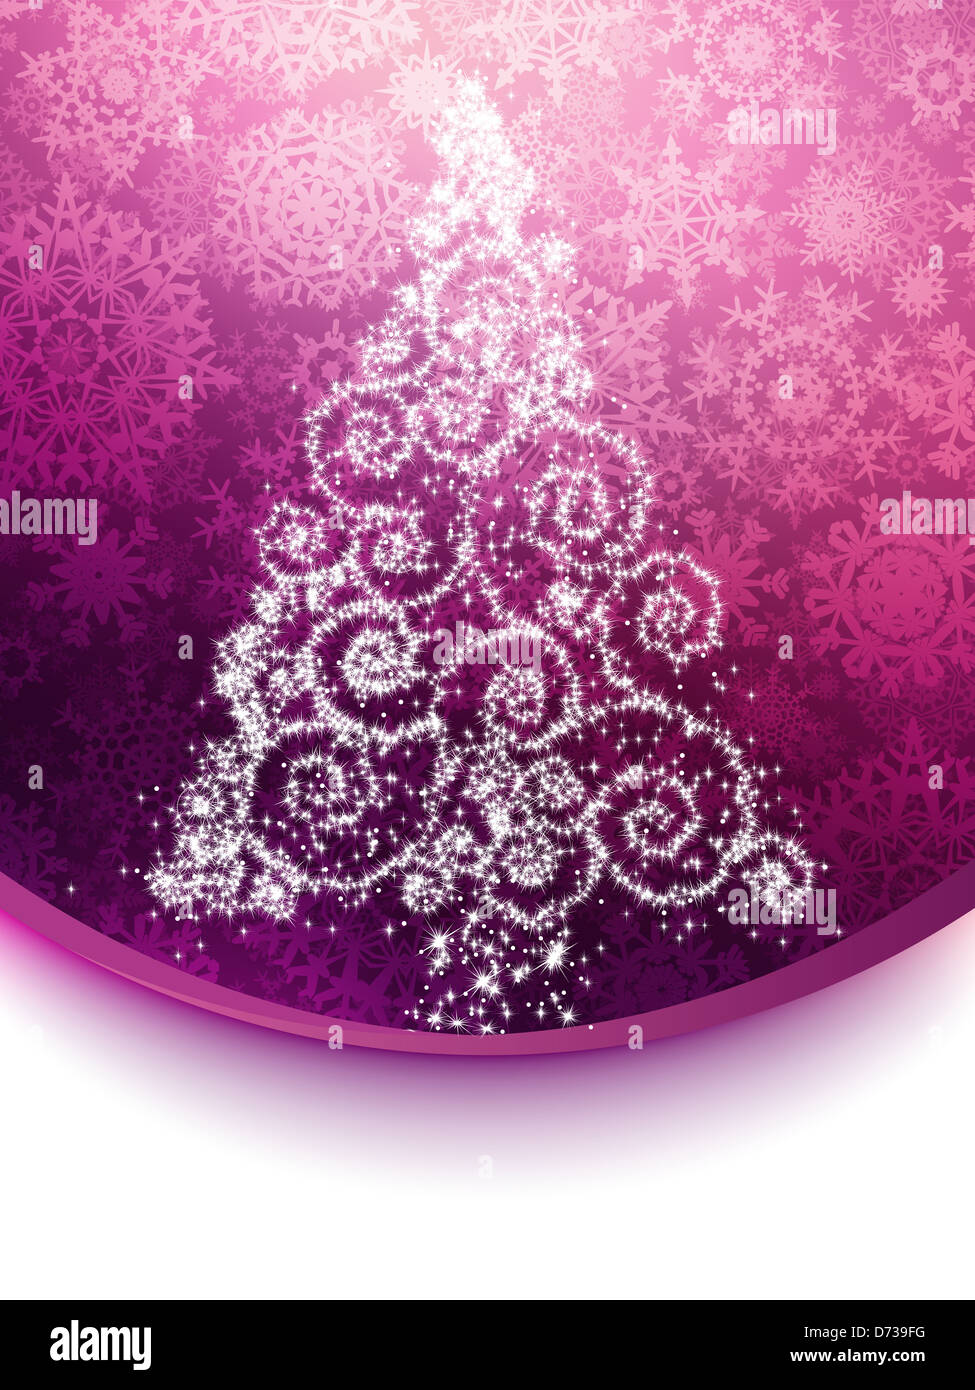 Elegant christmas background And also includes Stock Photo